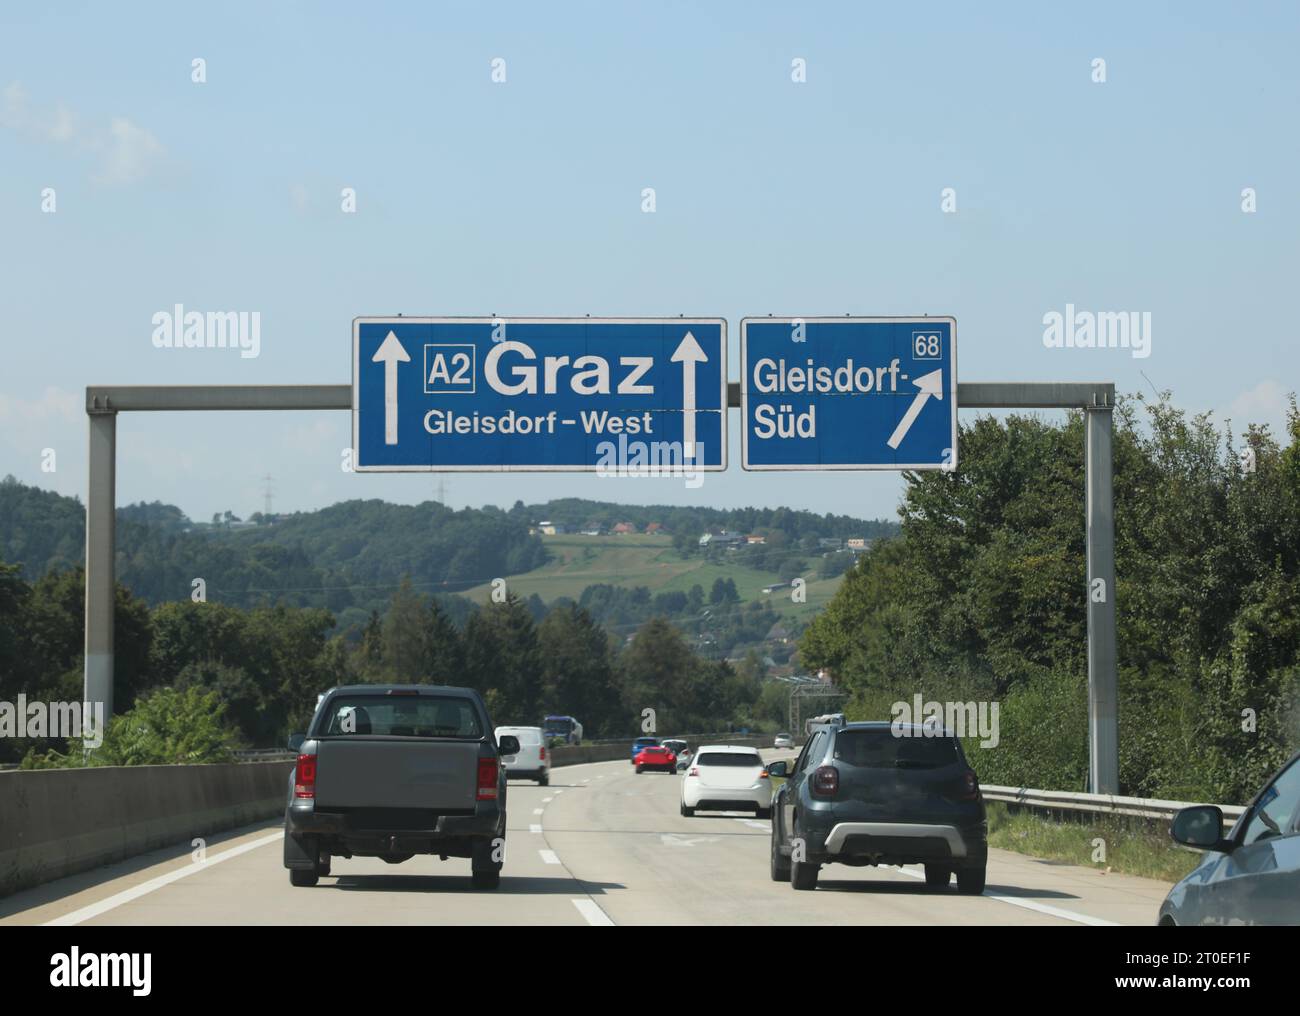 road sign on the highway with Austrian locations and arrows to reach them Stock Photo